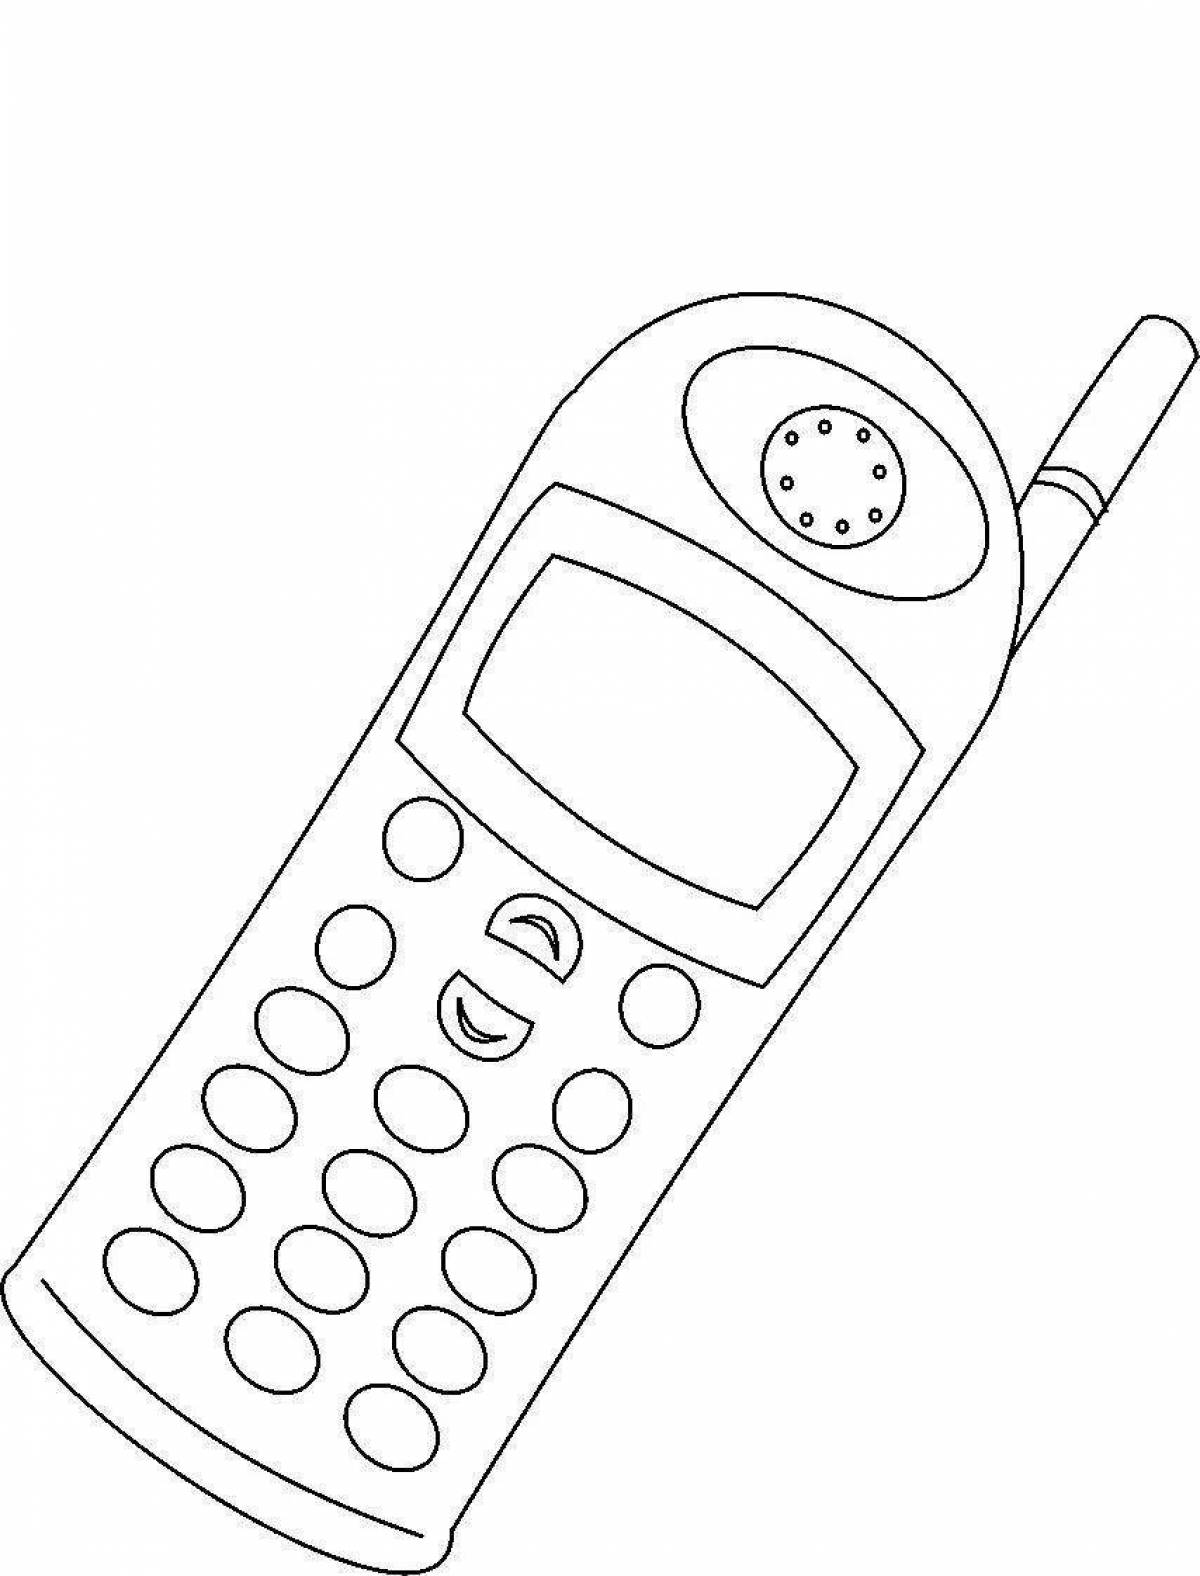 Unique android phone coloring page